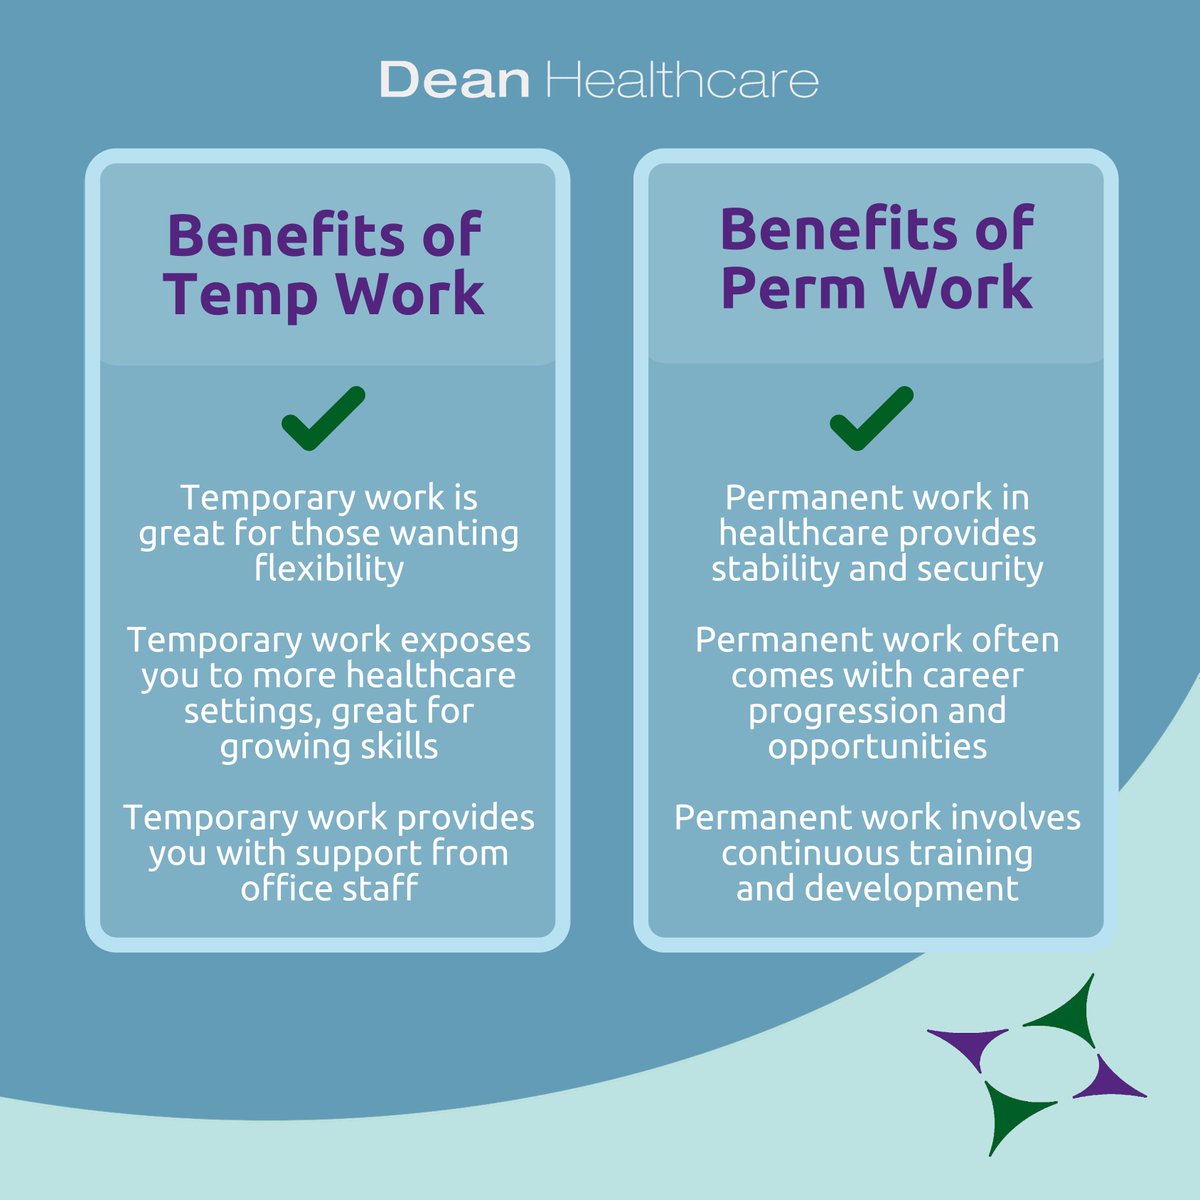 At Dean Healthcare, we provide opportunities for temporary and permanent work. But which would suit you best after looking at the different benefits of them?

#healthcare #health #care #wellness #wellbeing #tempwork #temporaryjobs #permwork #benefits #highlight #flexibility